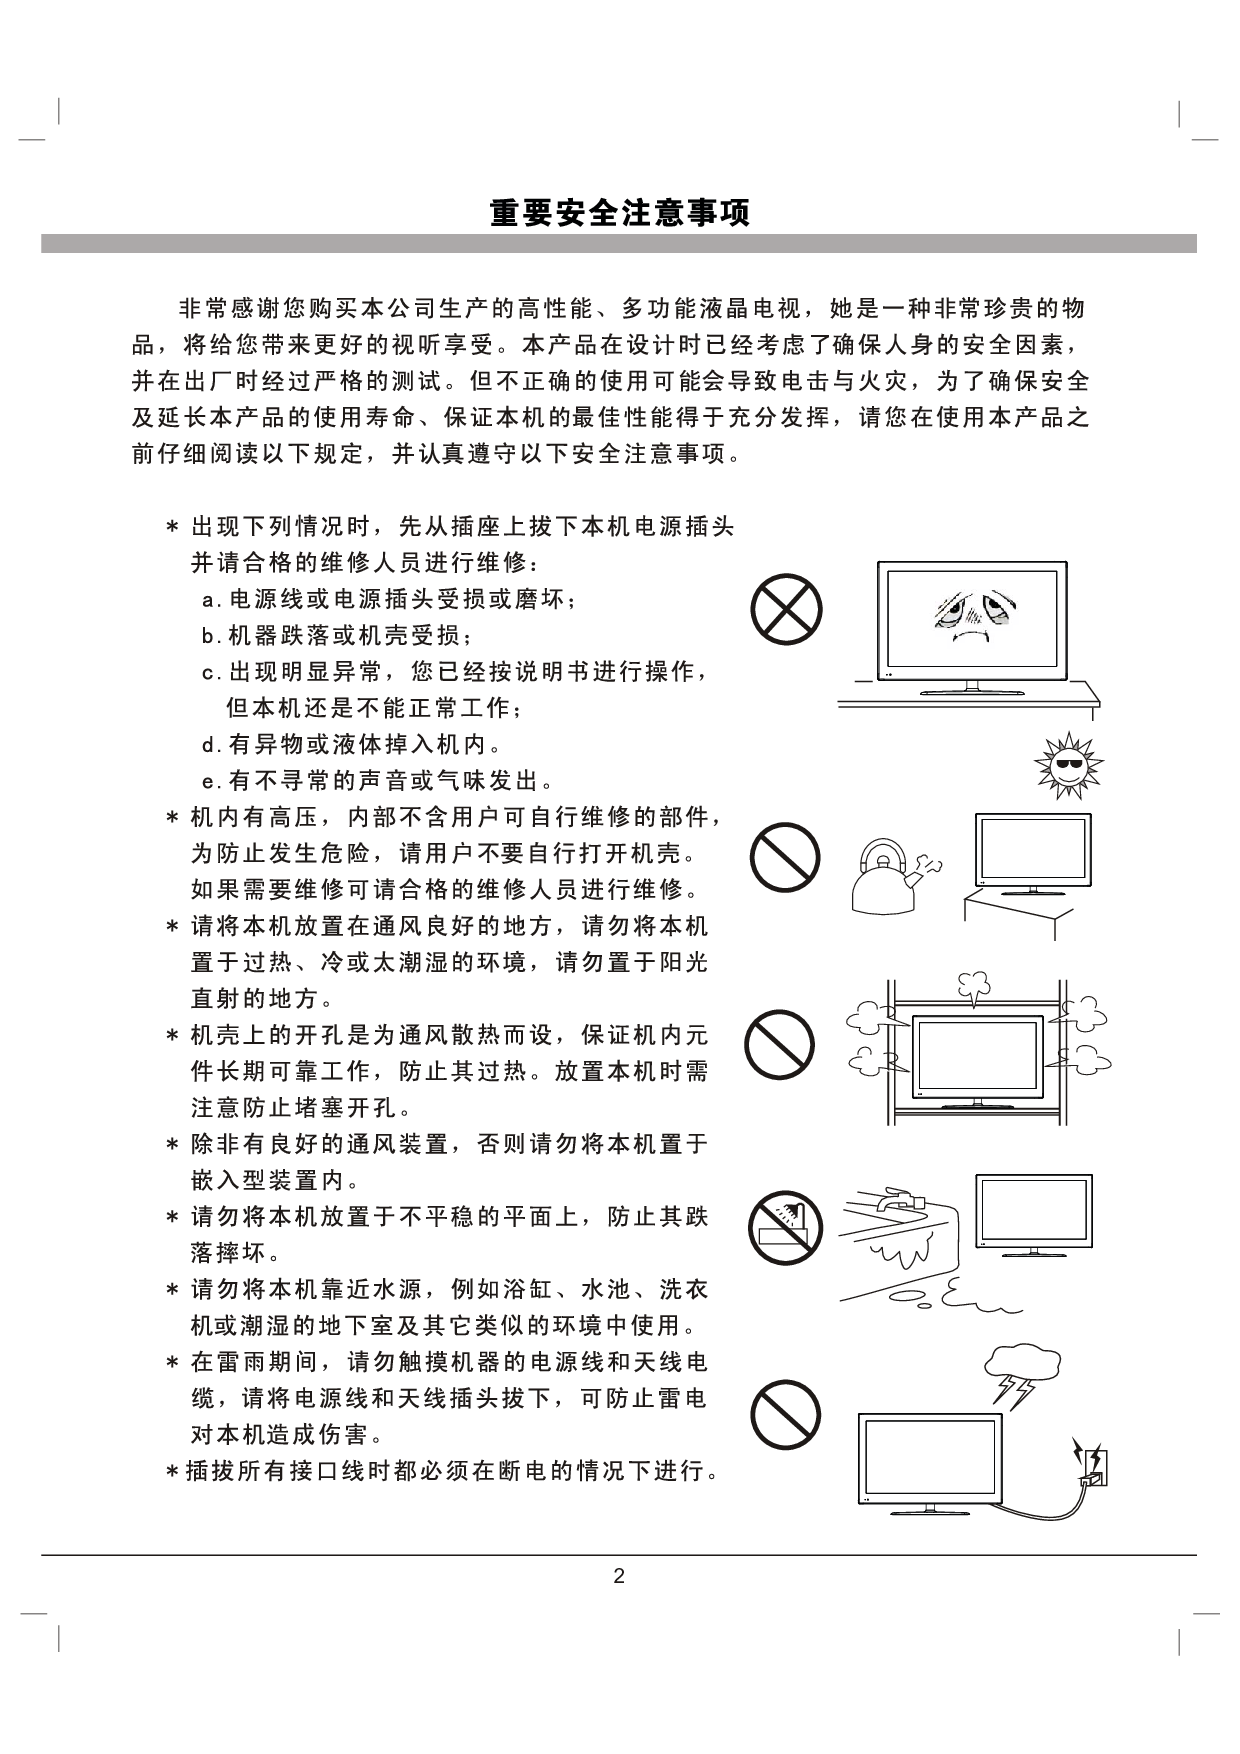 TCL 4212C3DS 使用说明书 第2页